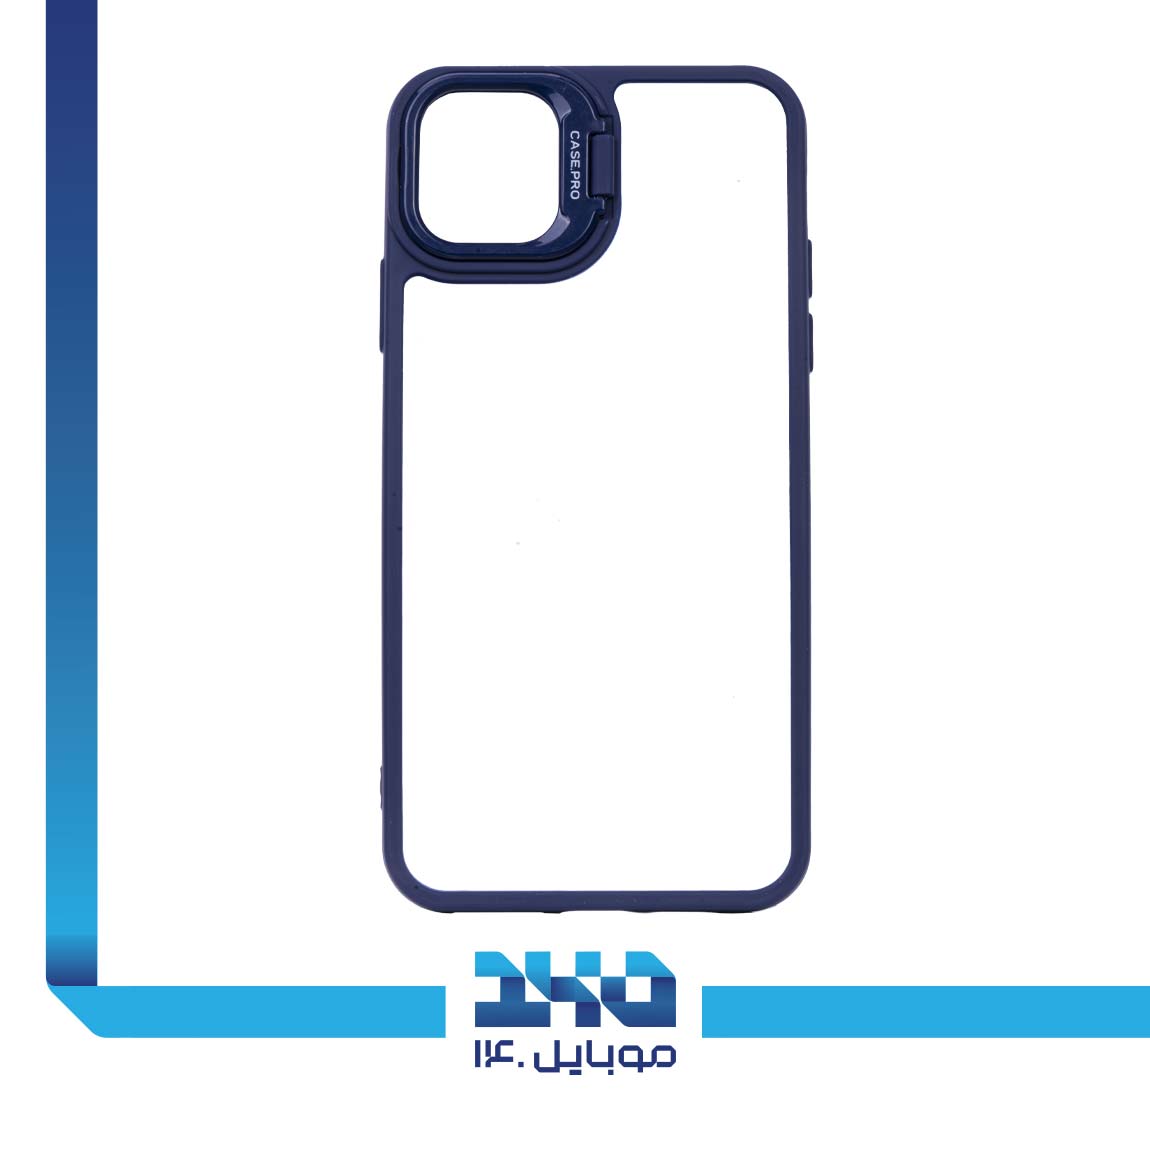  Holder Case For iPhone 11 Pro Max 3